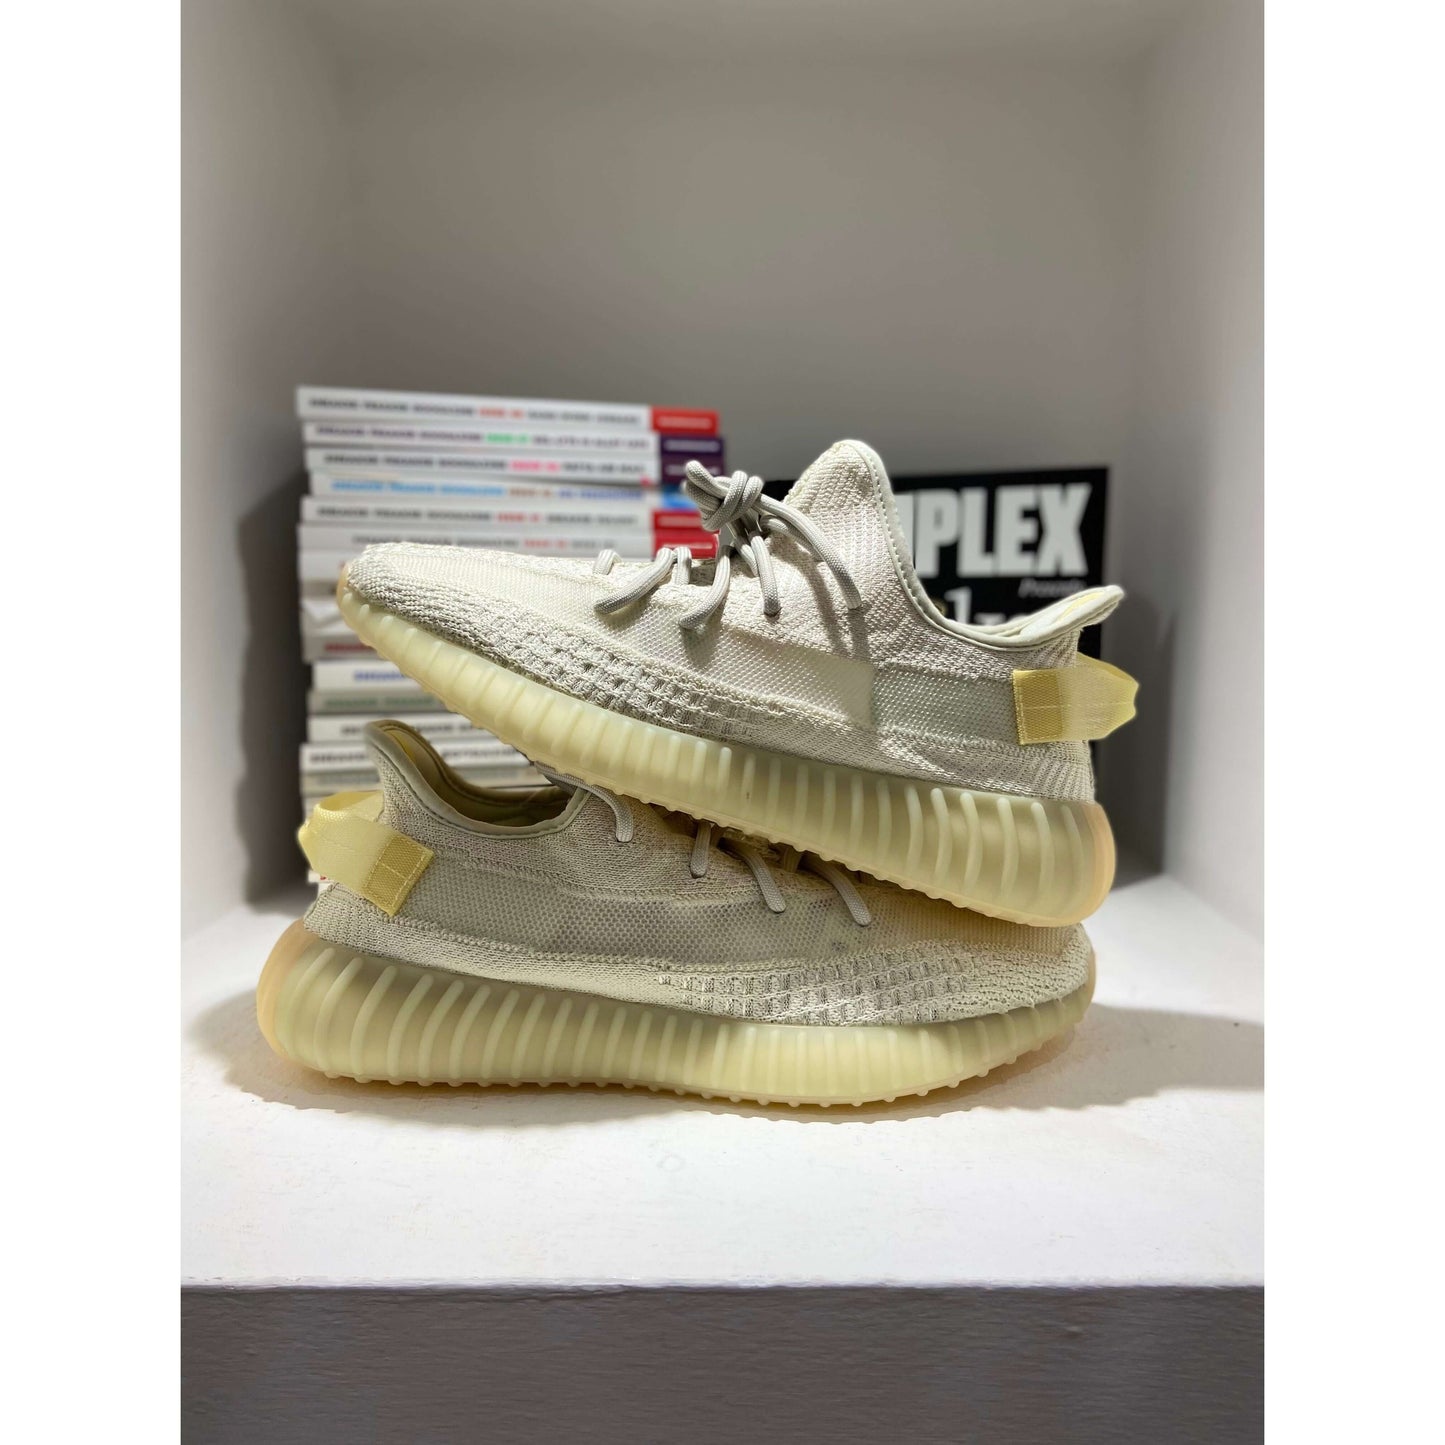 adidas Yeezy Boost 350 V2 Light from Yeezy